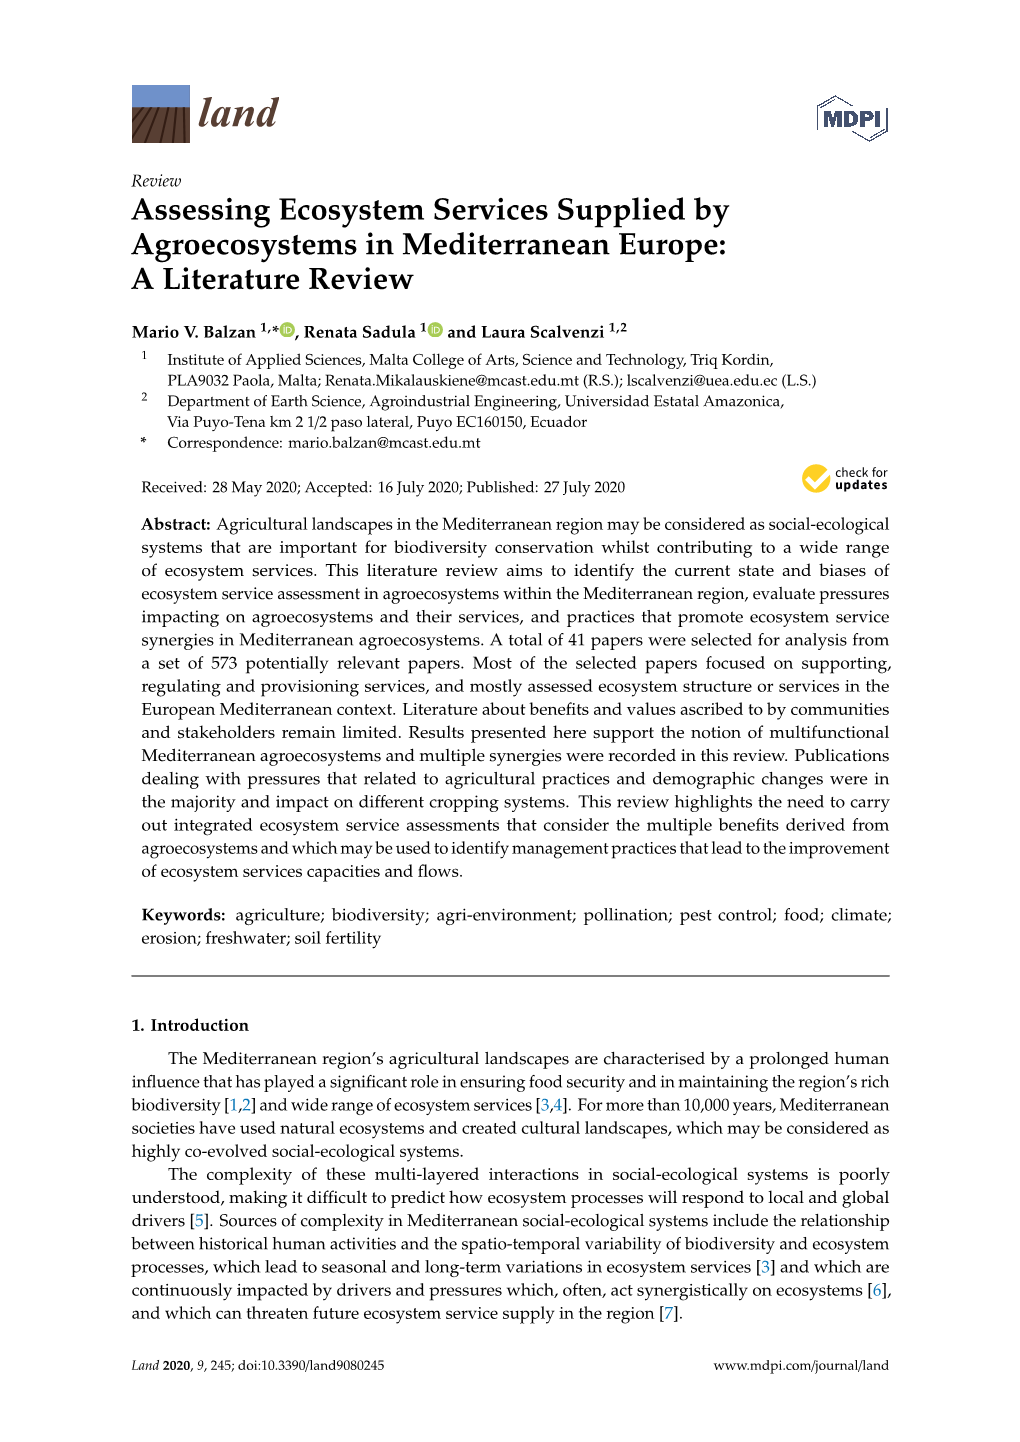 Assessing Ecosystem Services Supplied by Agroecosystems in Mediterranean Europe: a Literature Review